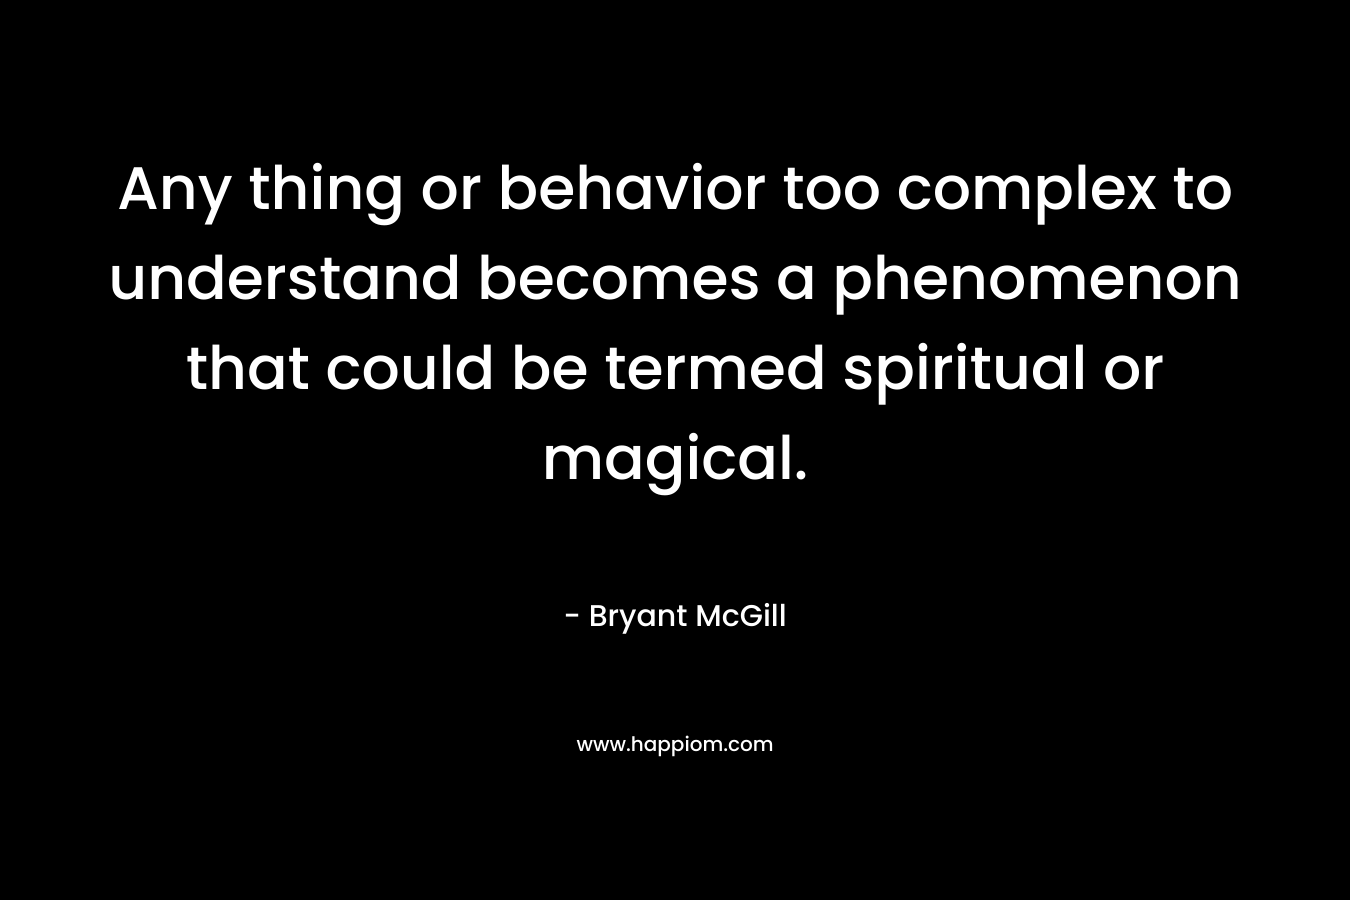 Any thing or behavior too complex to understand becomes a phenomenon that could be termed spiritual or magical.